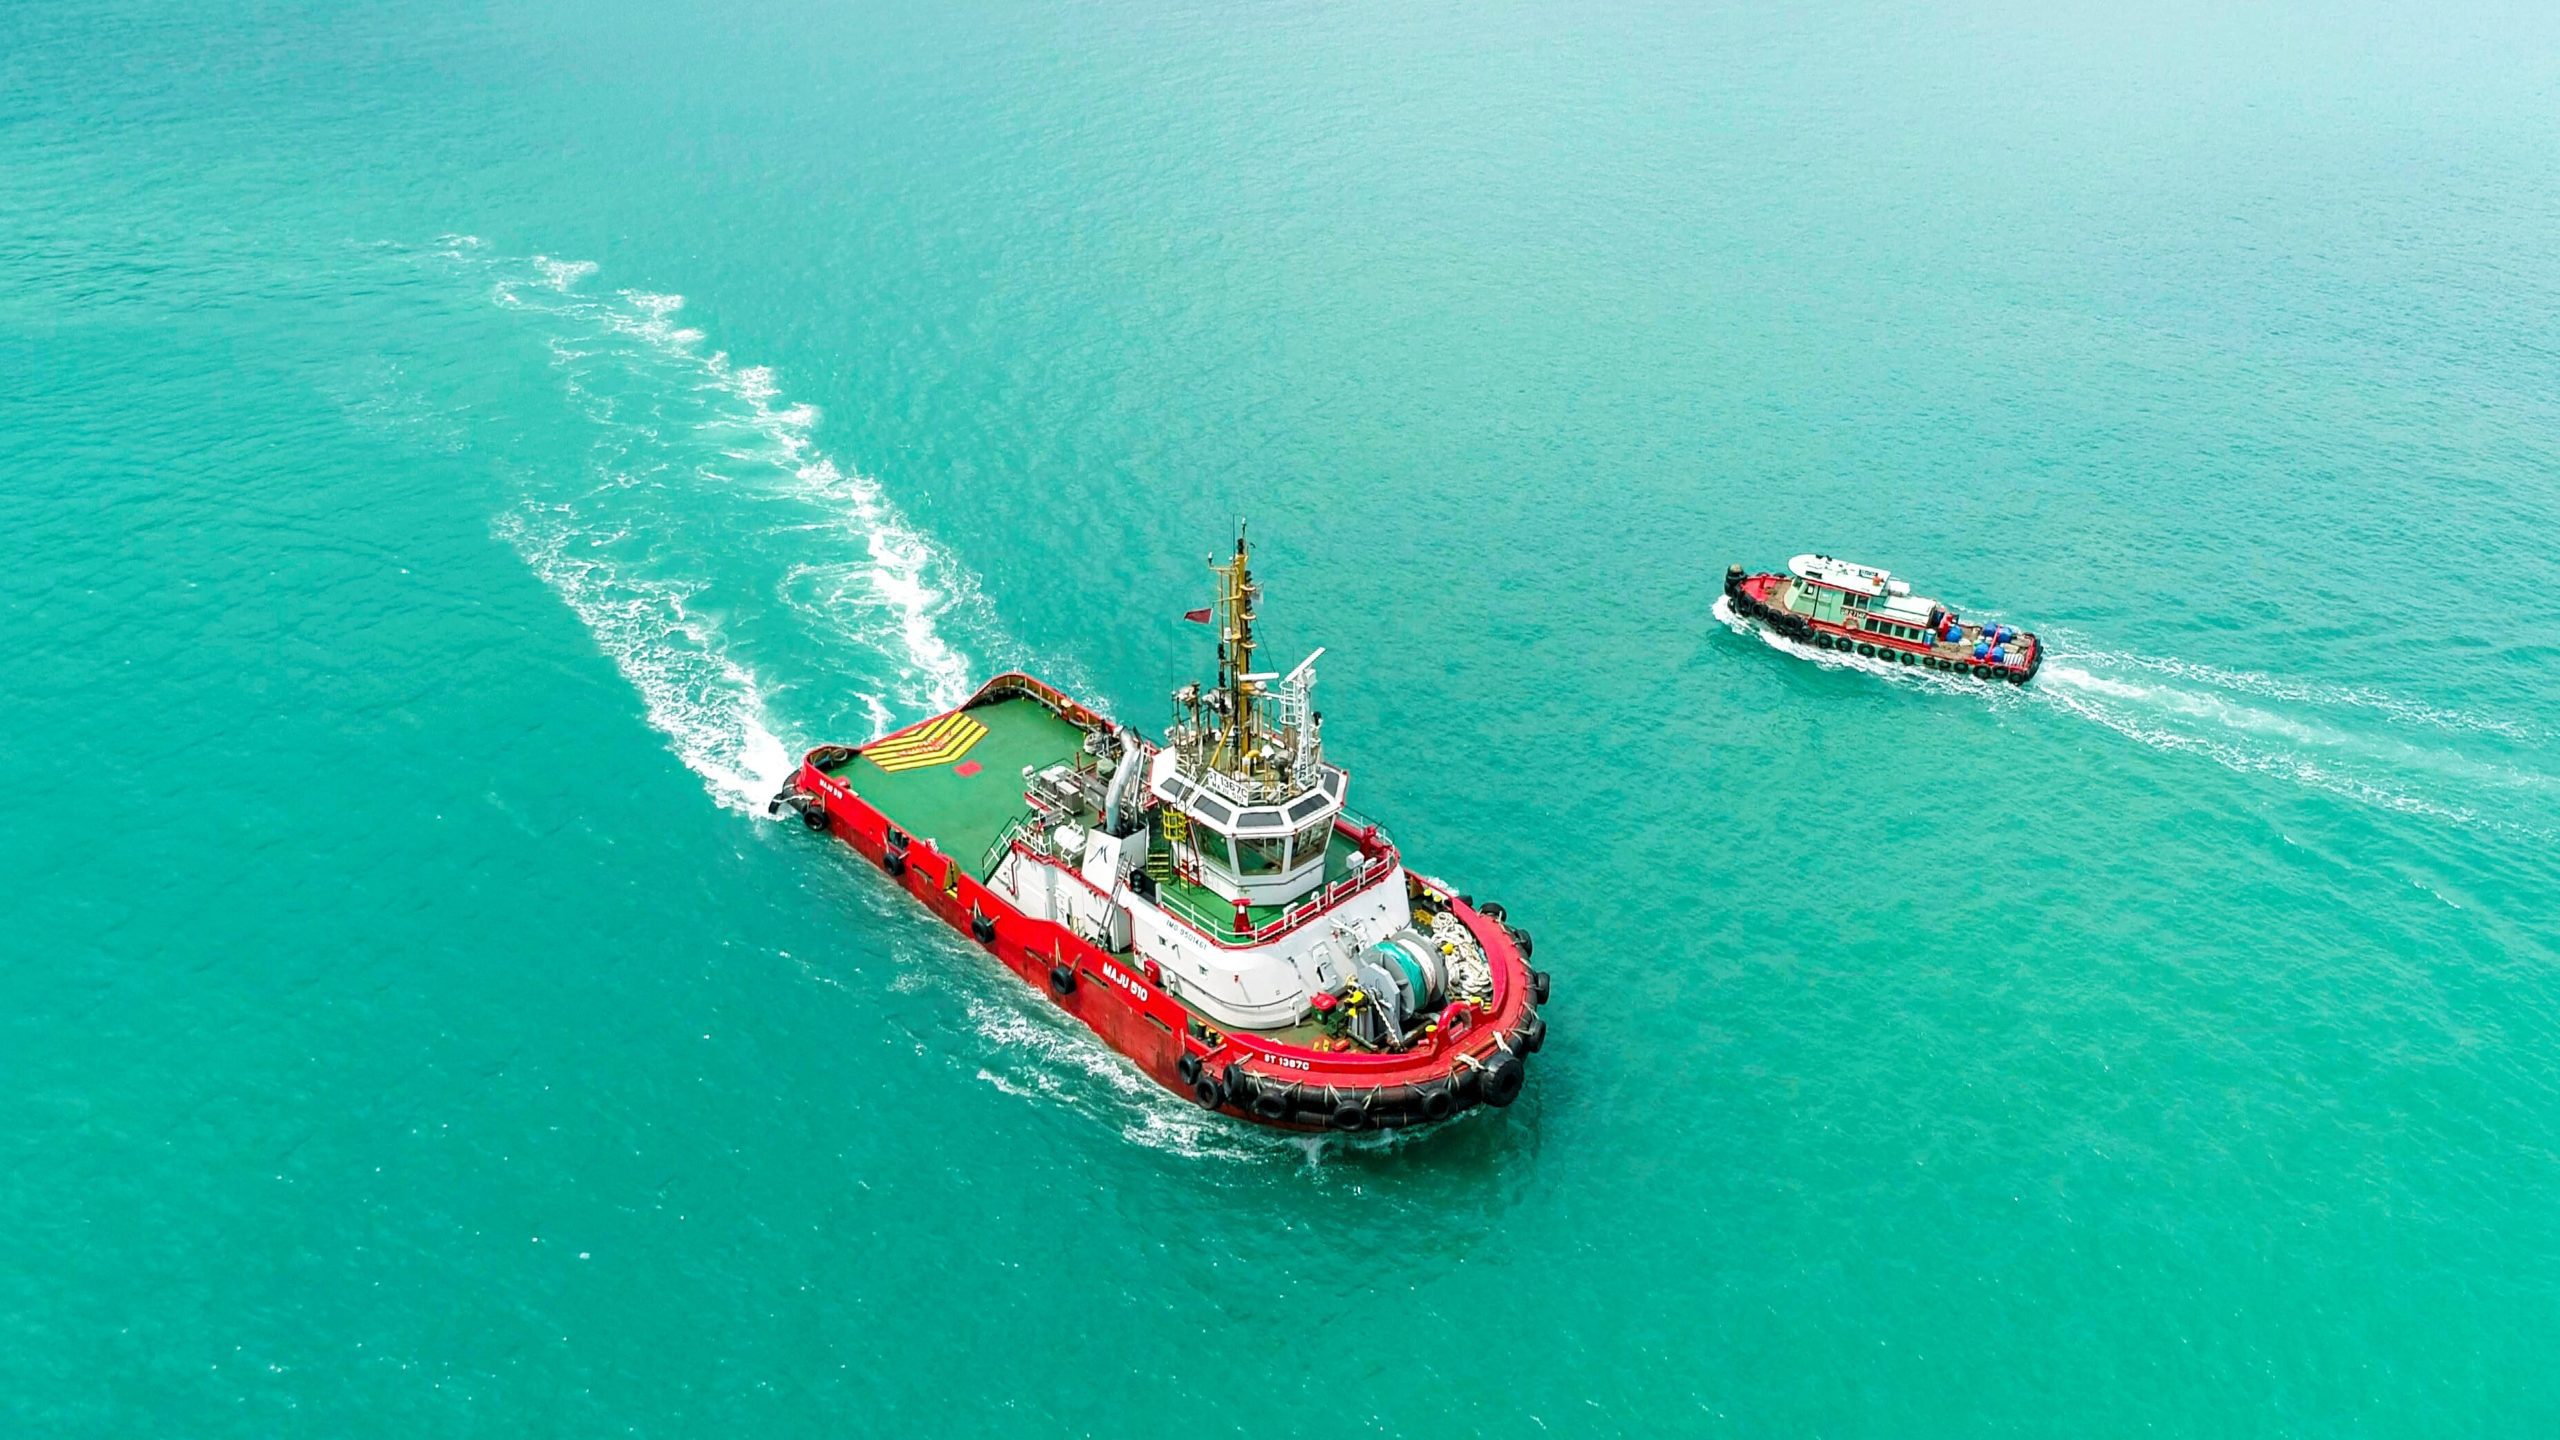 ABB and Keppel O&M verify next level of vessel autonomy with collision avoidance trials